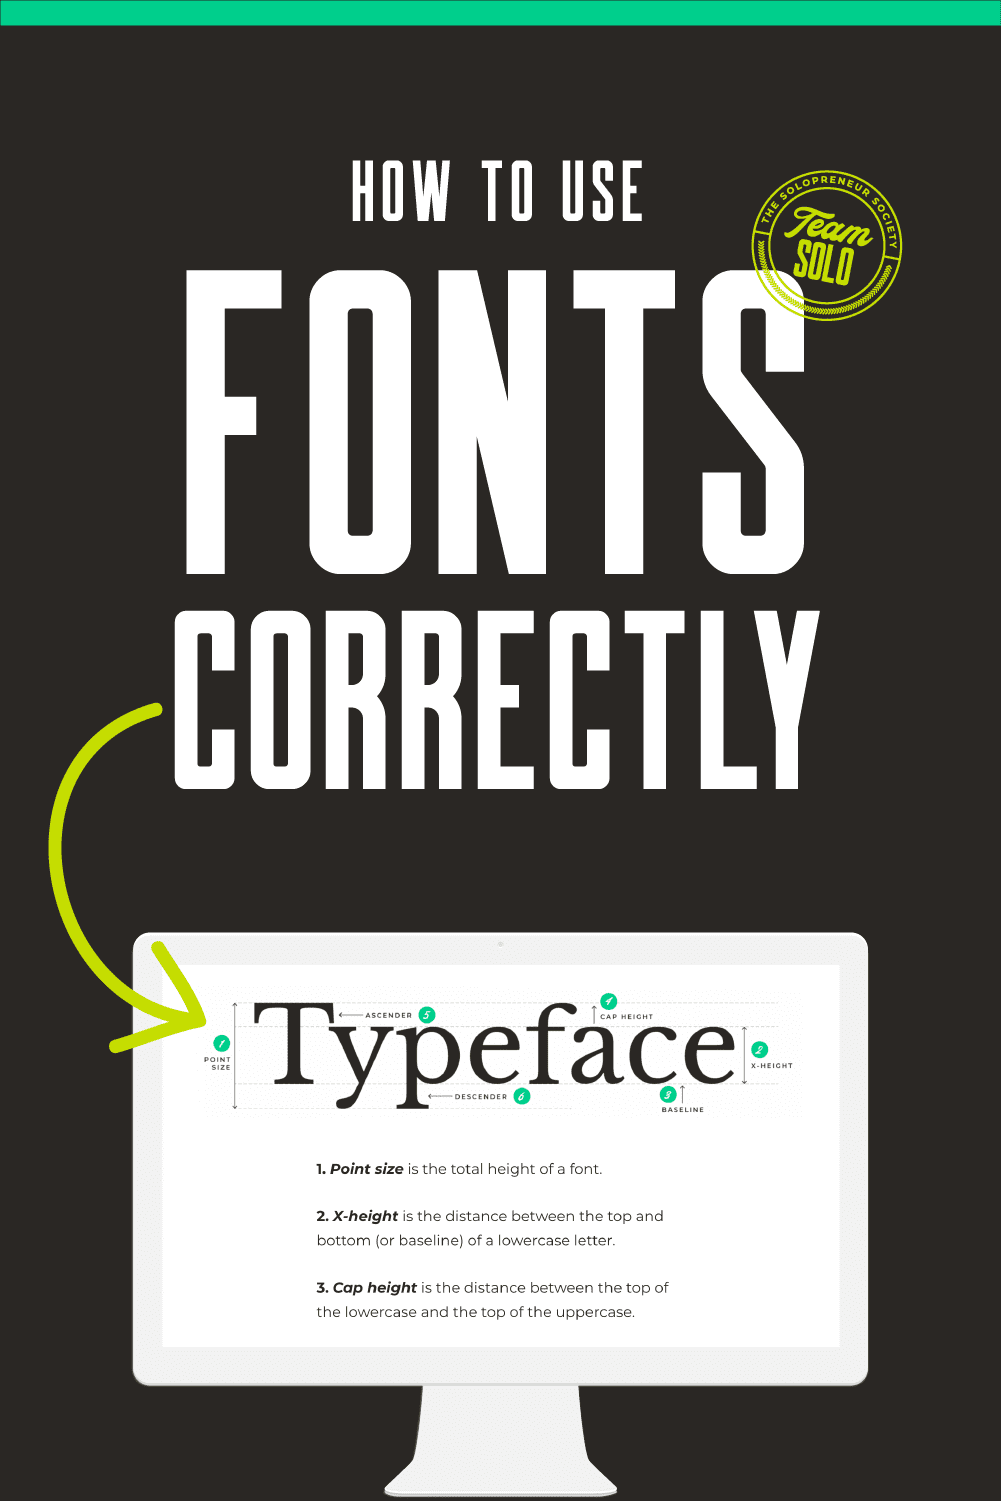 How To Use Fonts Like a Boss, Even If You’re a Design Newbie